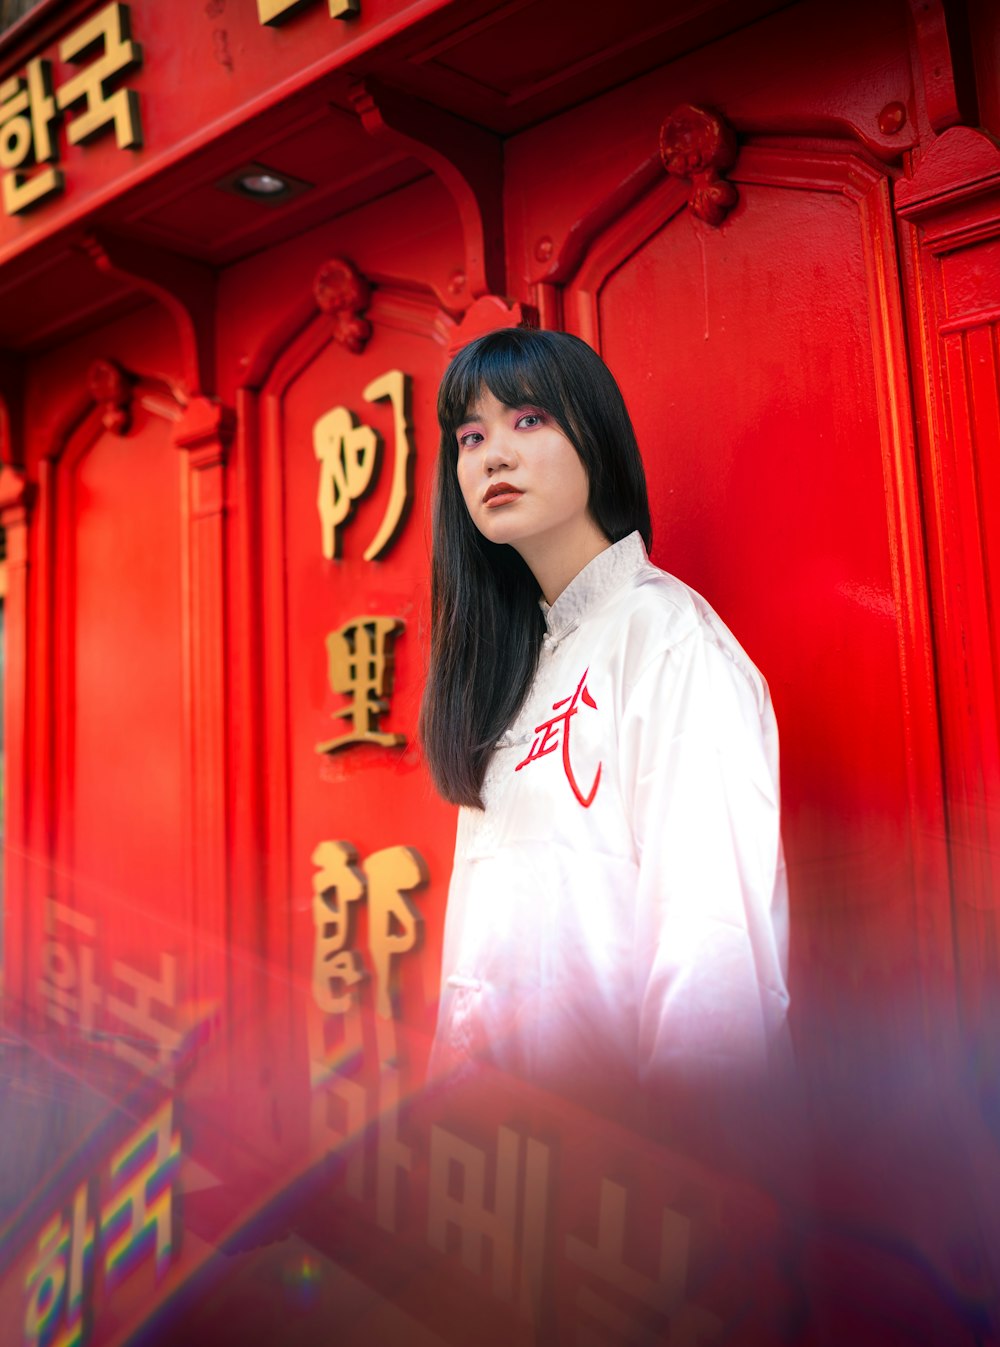 woman in white button up shirt standing near red door